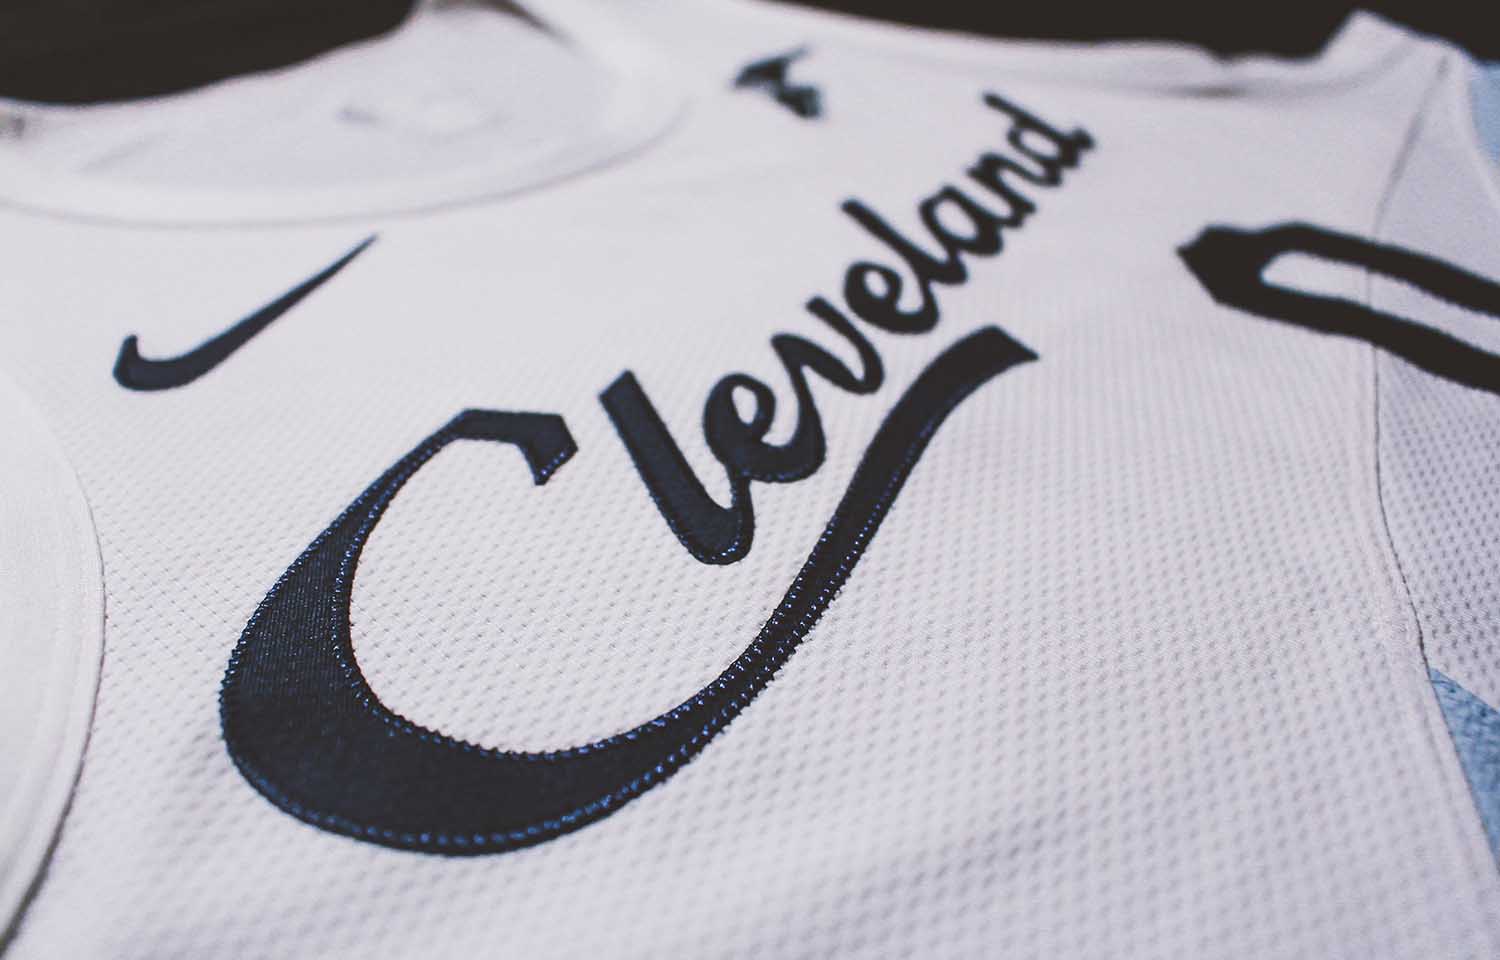 Report: Cleveland Cavaliers to add 2 new jerseys for 2018-19 season